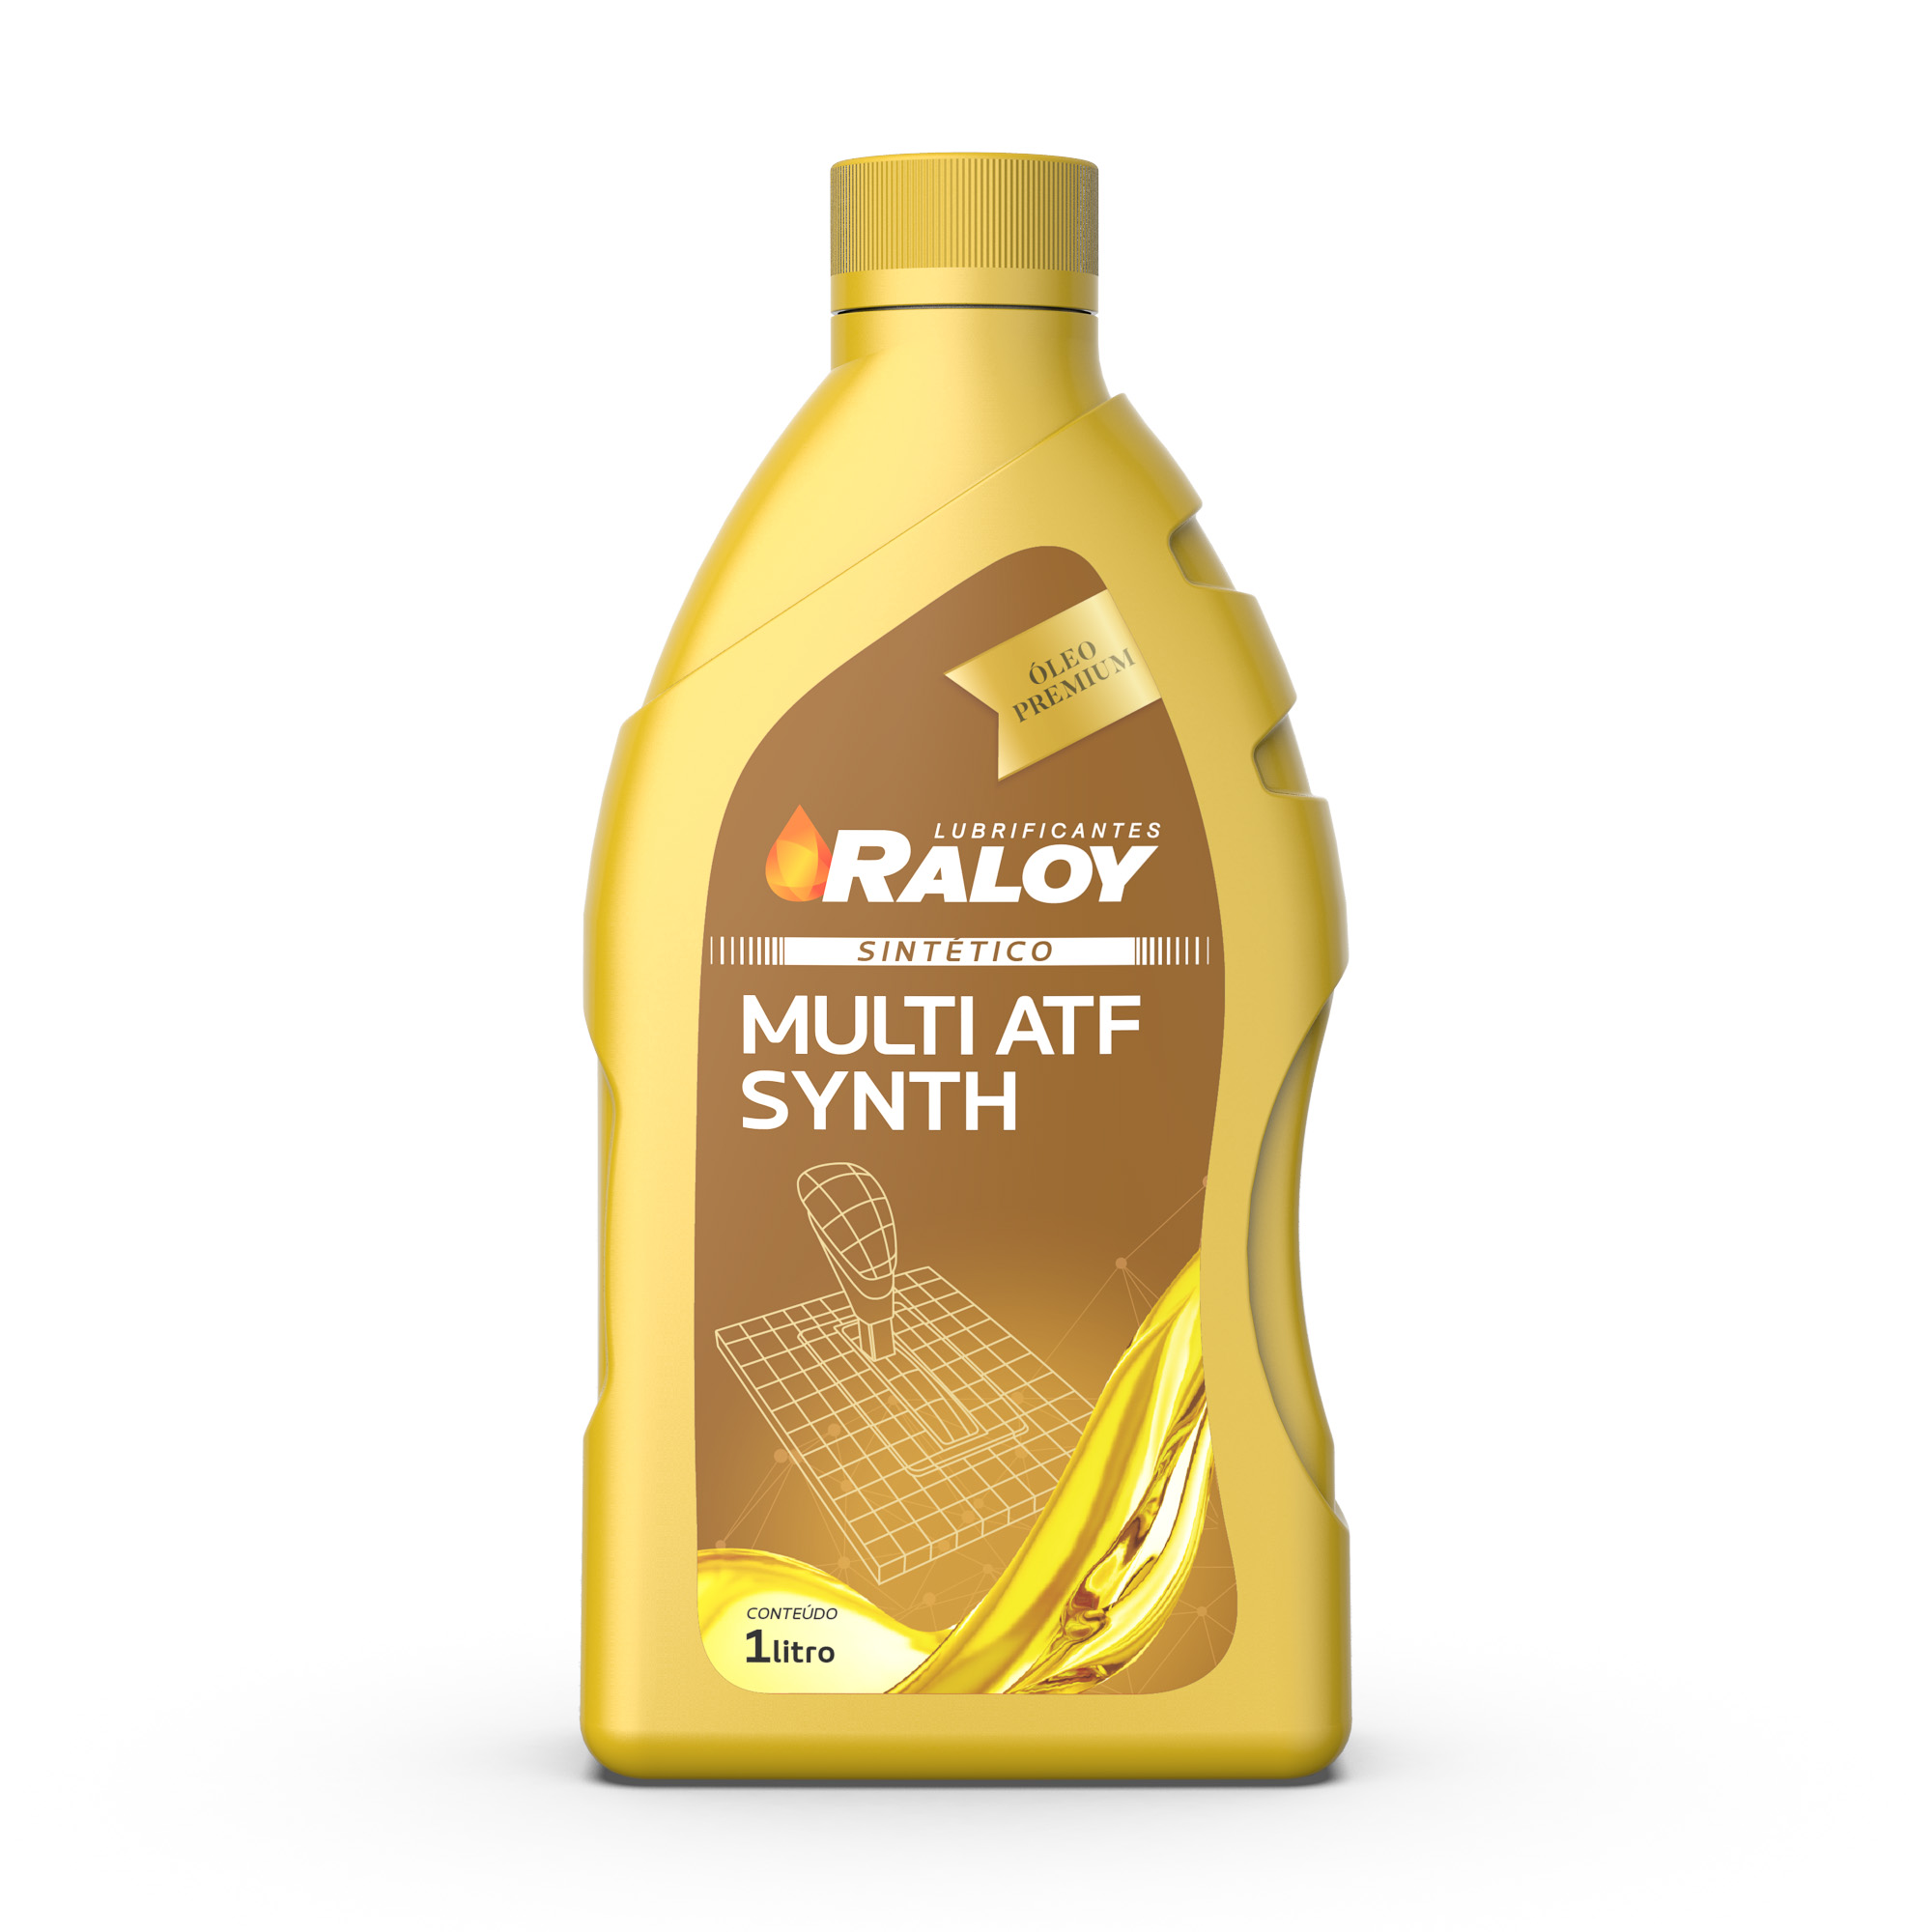 RALOY MULTI ATF SYNTH